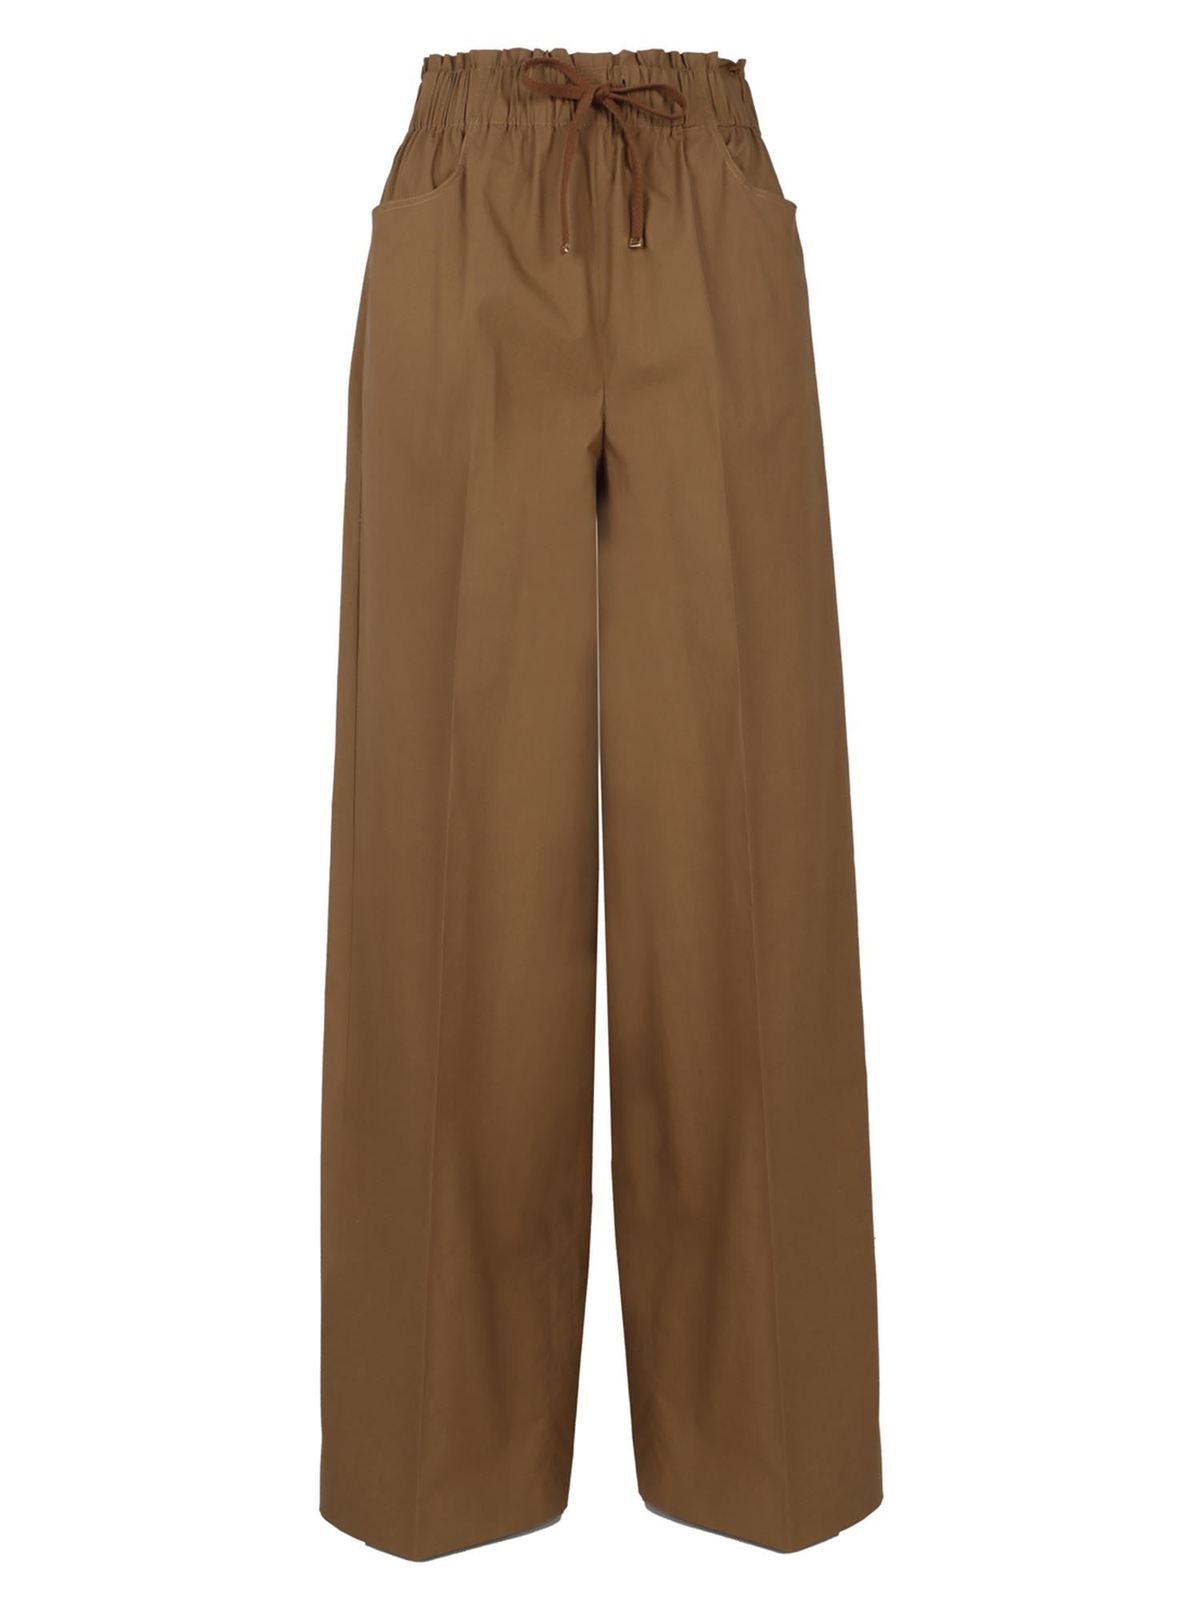 LES COPAINS PALAZZO TROUSERS IN COLONIAL COLOR